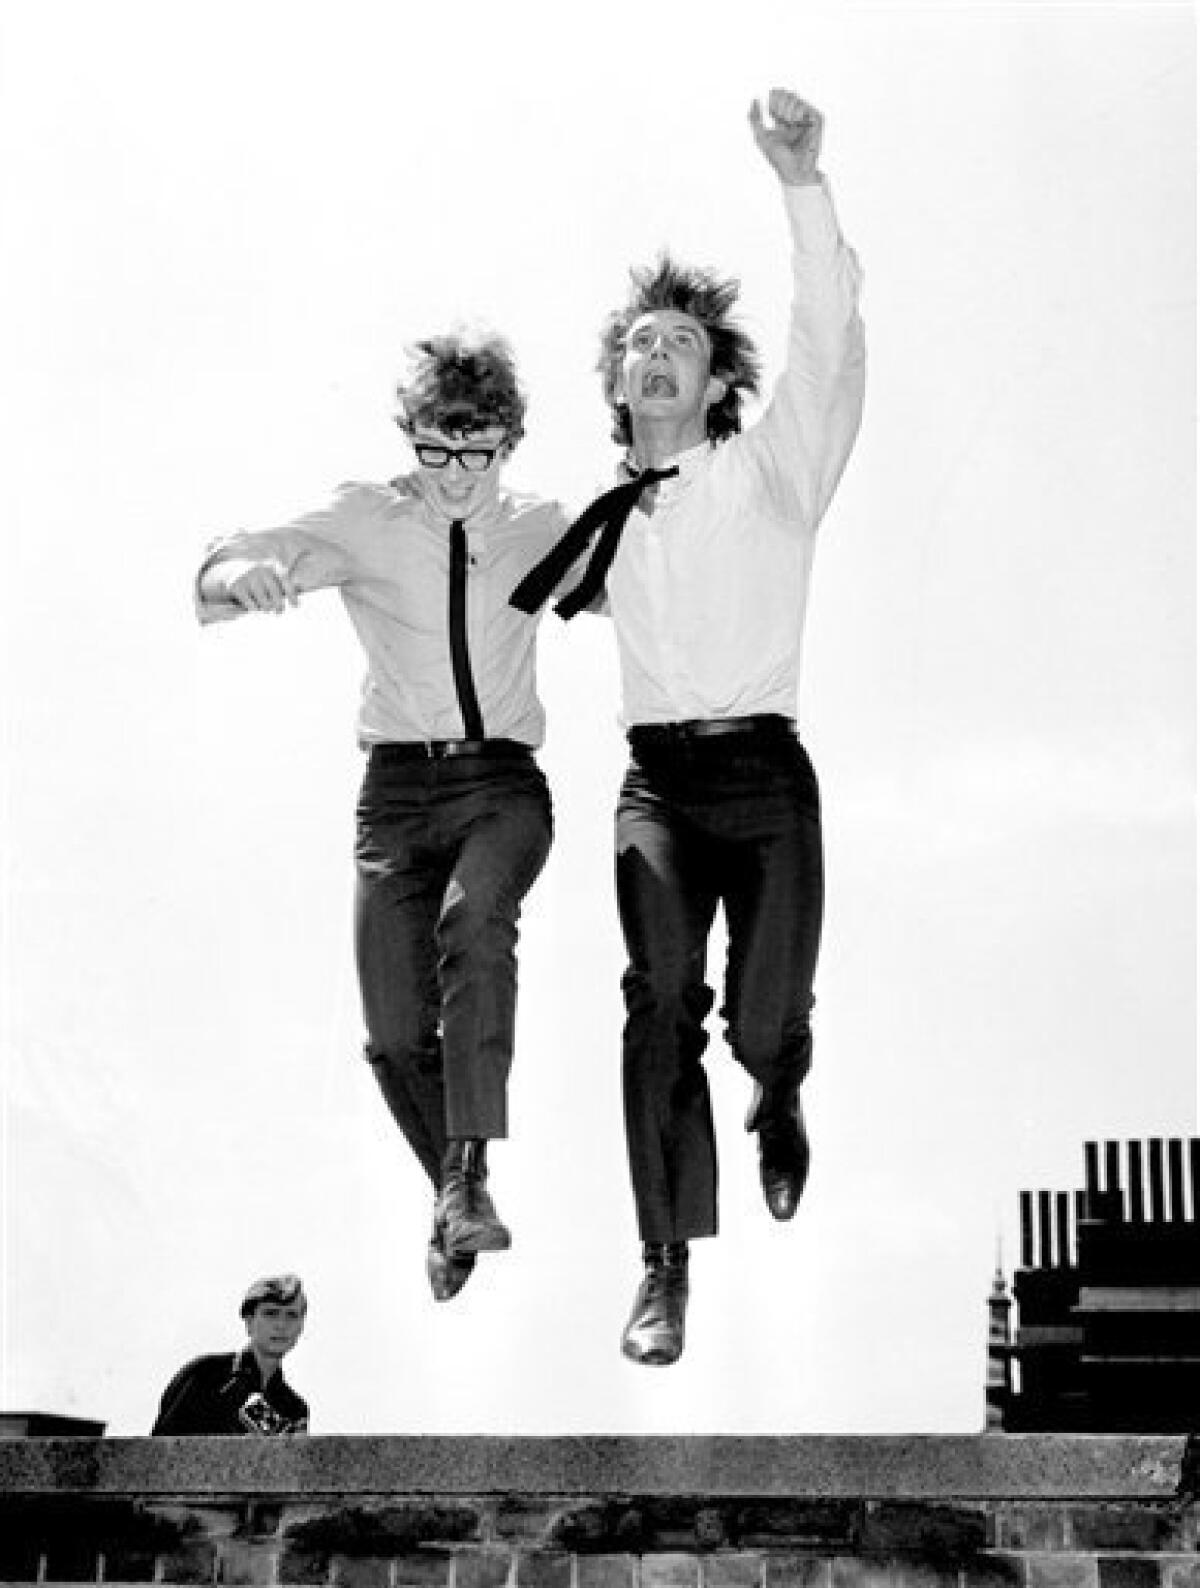 FILE- In this July 28, 1964 file photo, British pop singers Gordon Waller, right, and Peter Asher leap in the air upon their return to London after a successful American tour. Waller, who had a string of hits in the 1960s including several written by Paul McCartney, died Friday, July 17, 2009. He was 64. (AP Photo)